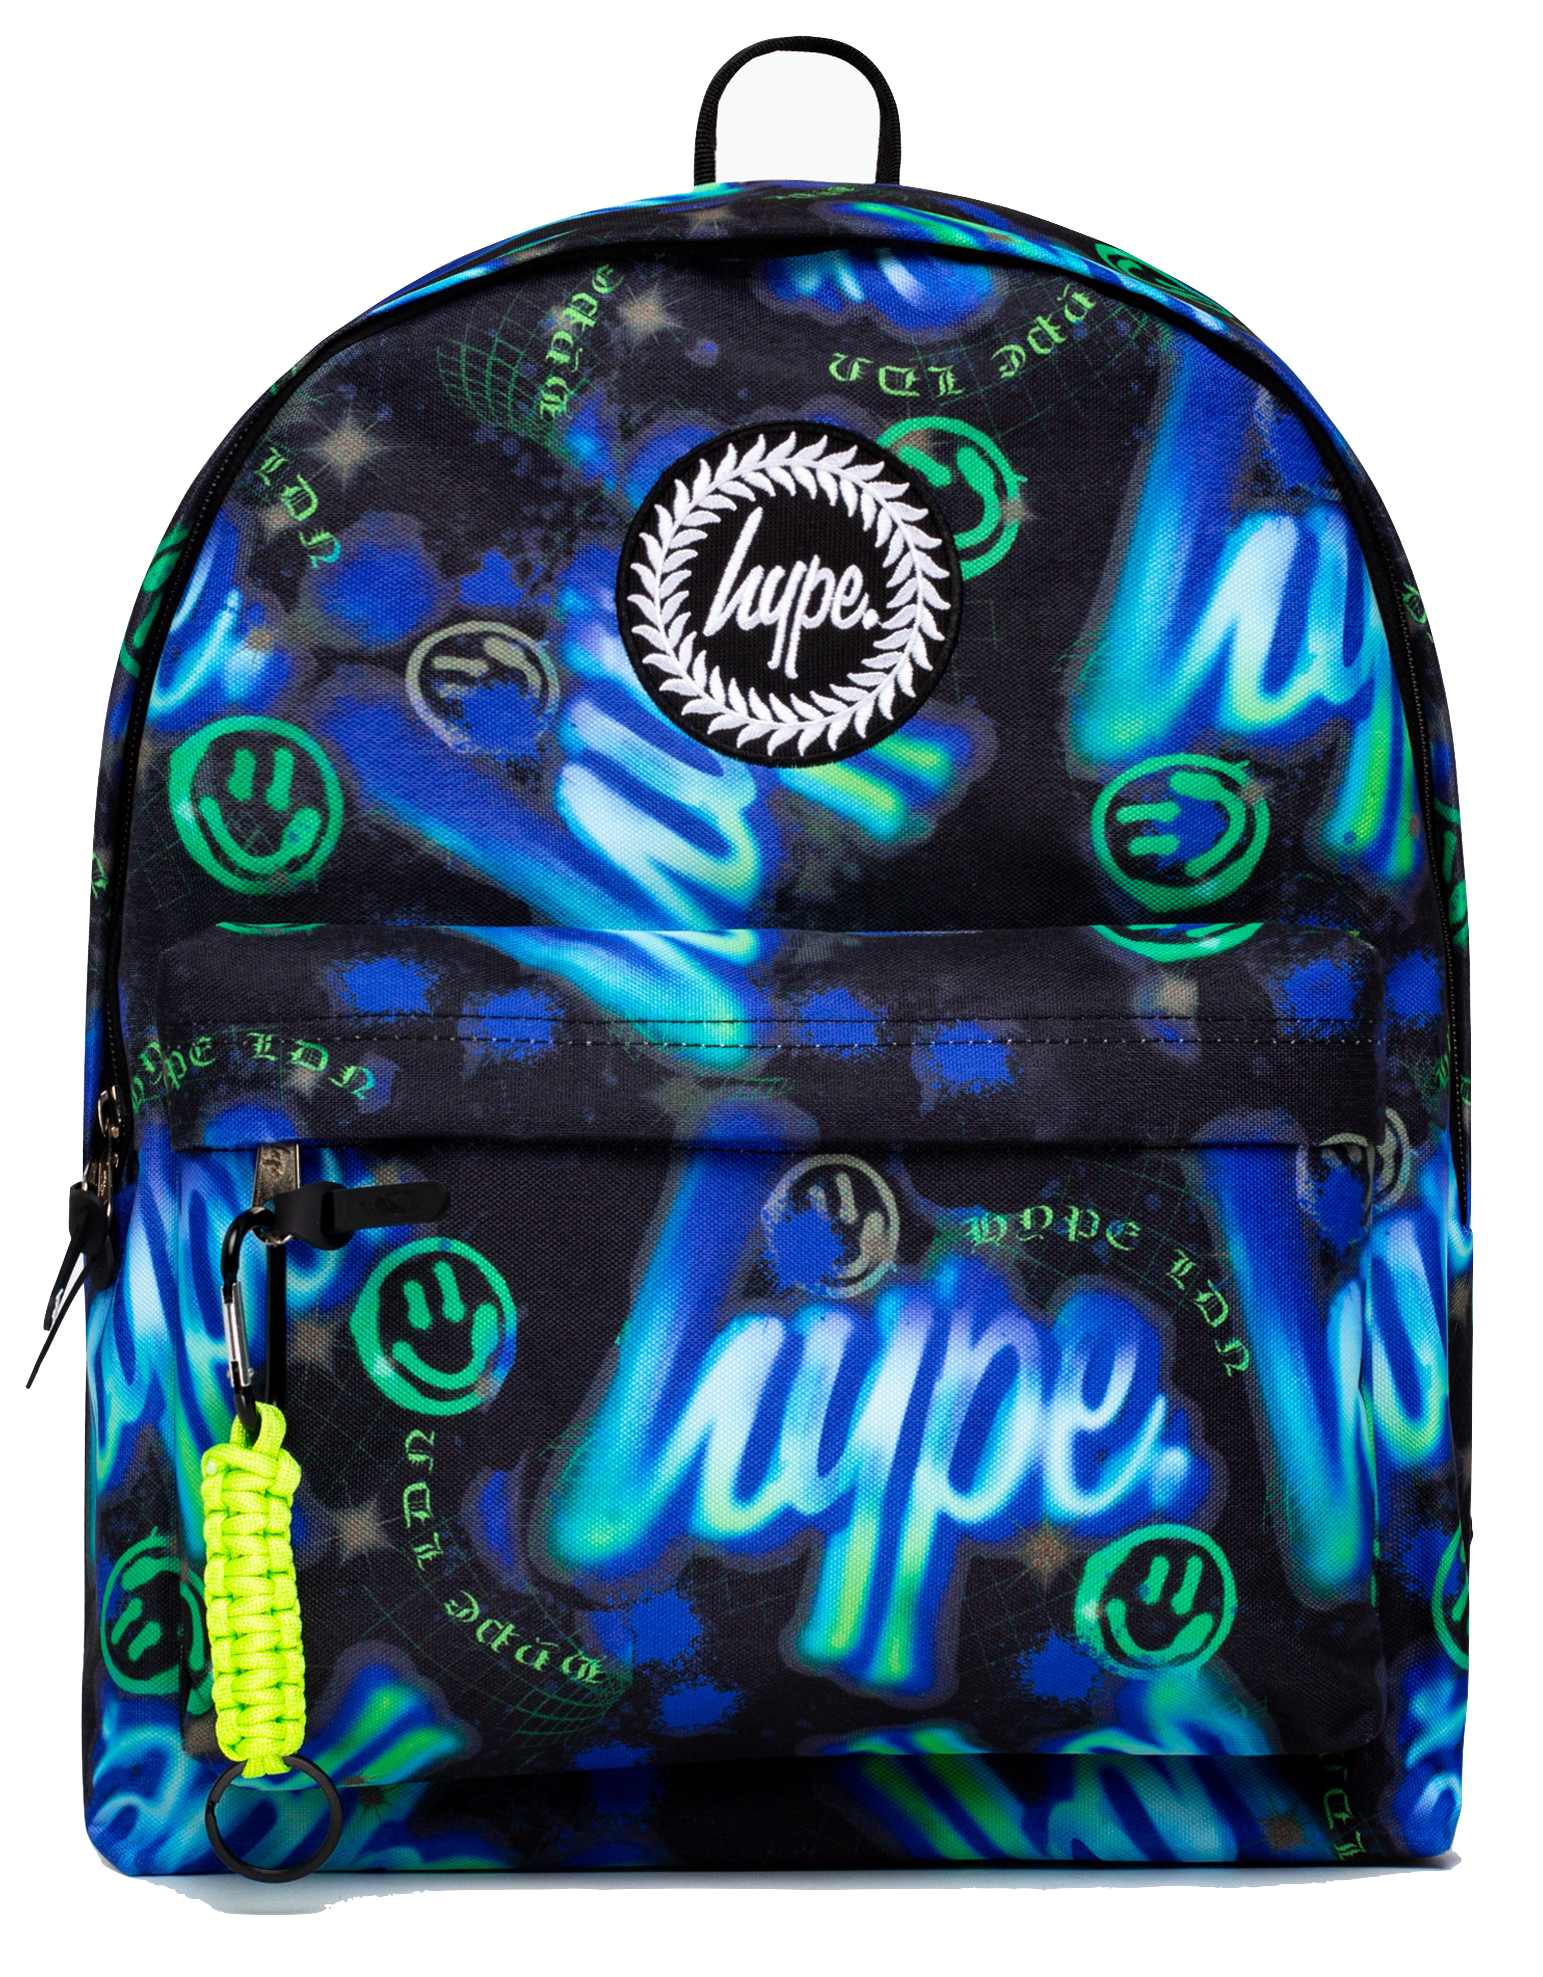 BACKPACKS & PENCIL CASES